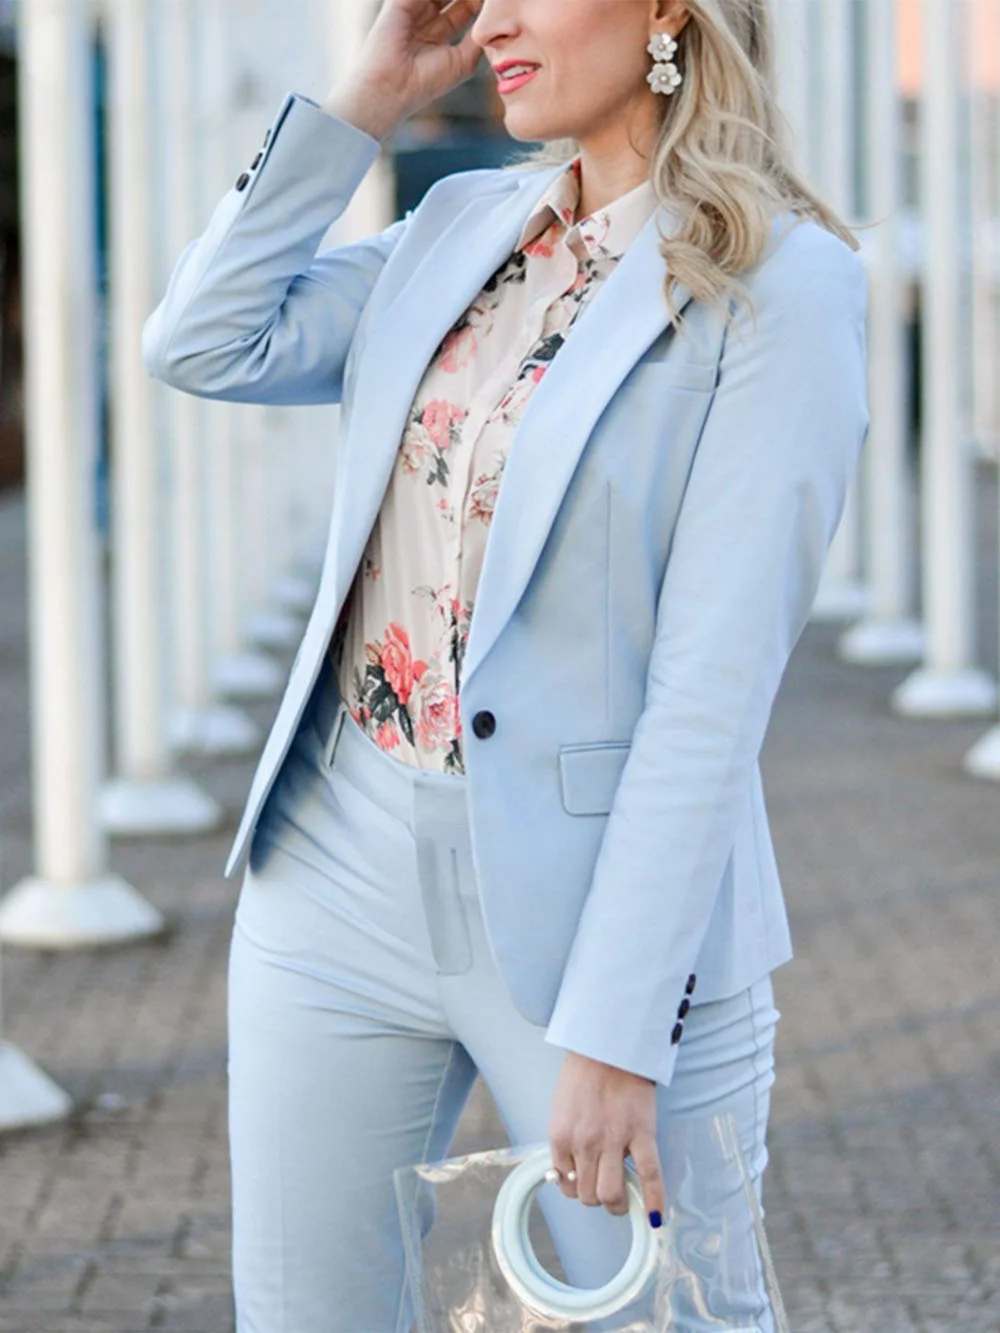 Light Blue One Button Women's Suit Casual Blazer Jacket and Pants Fashion Free Style For Daily Life Dressing